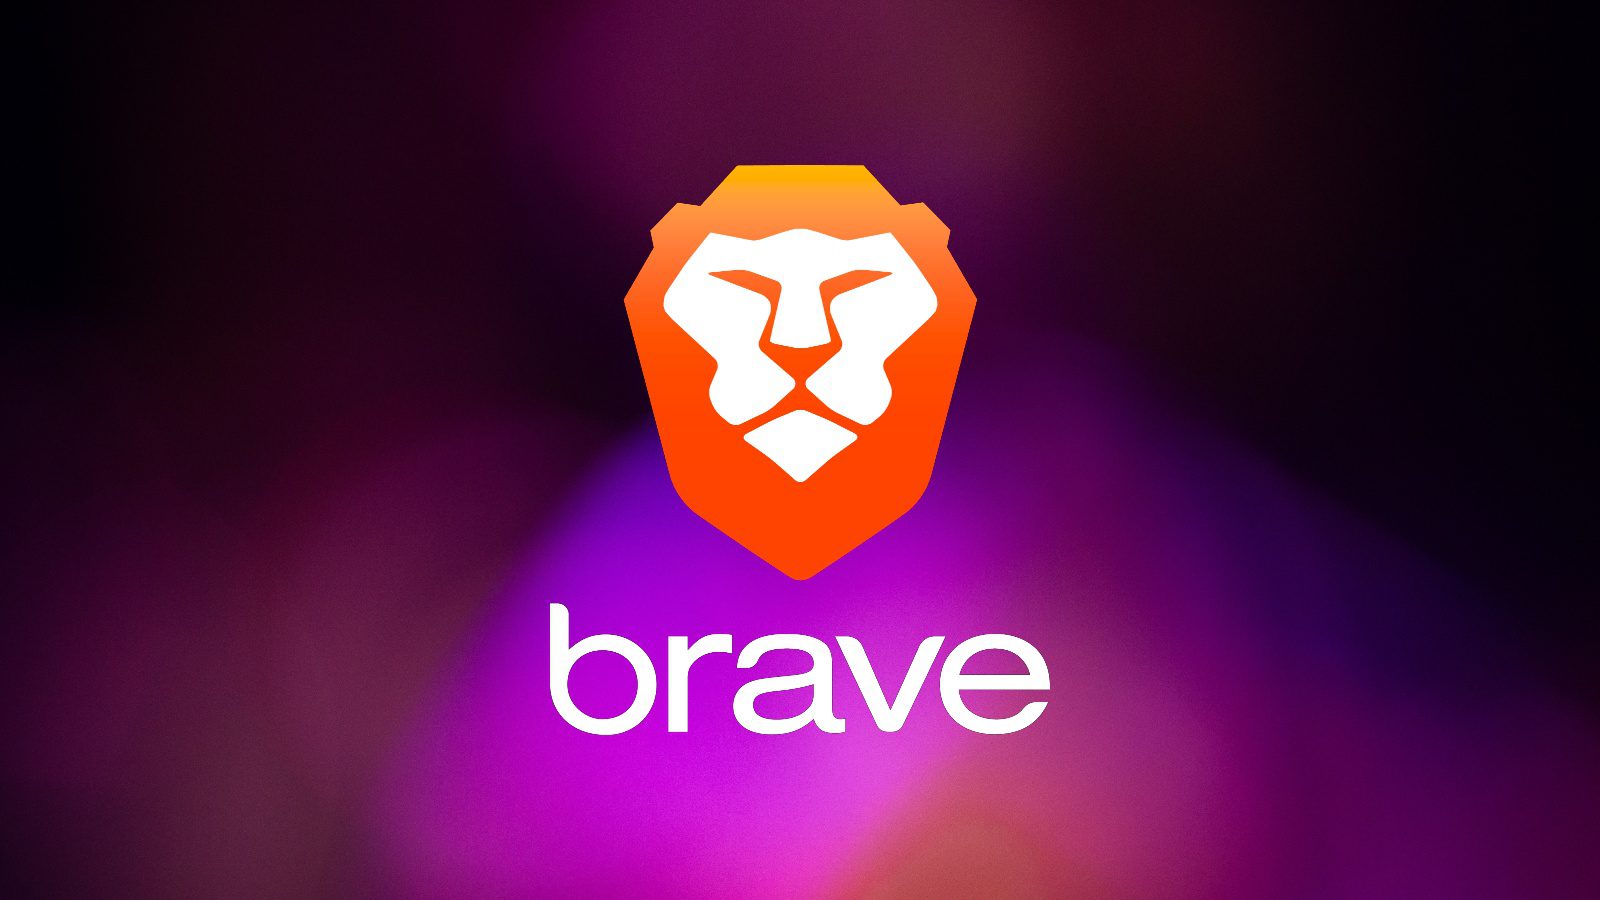 Review on Brave browser